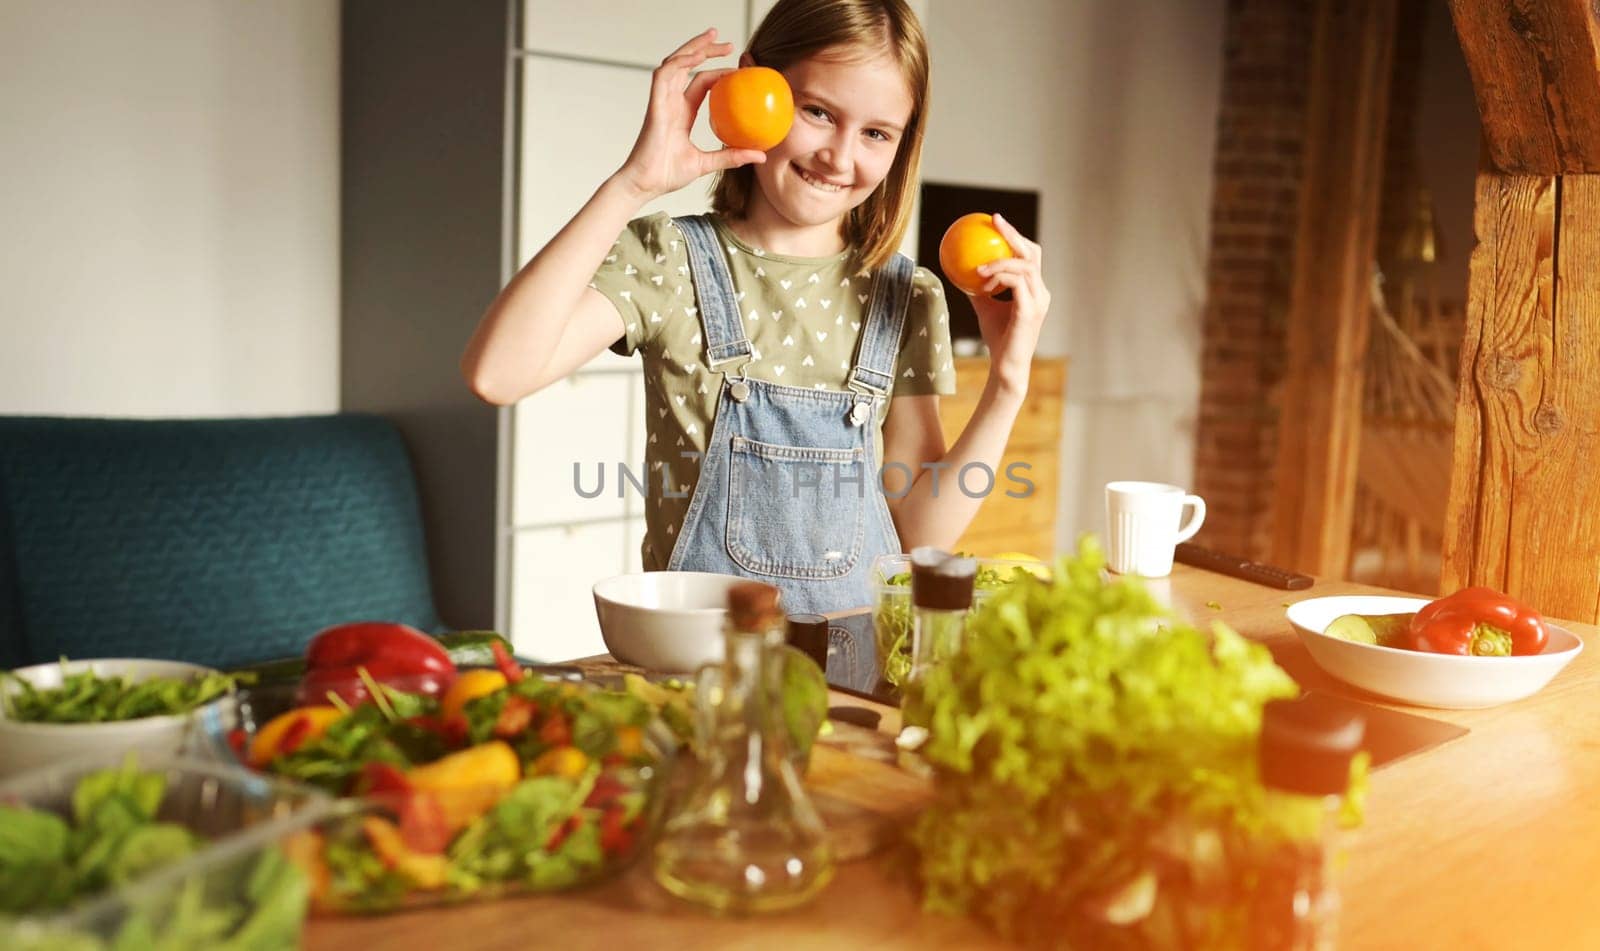 Girl child holding oranges at kitchen and smiling. Pretty female kid with citrus fruits and vegetables preparing vegetarian lunch